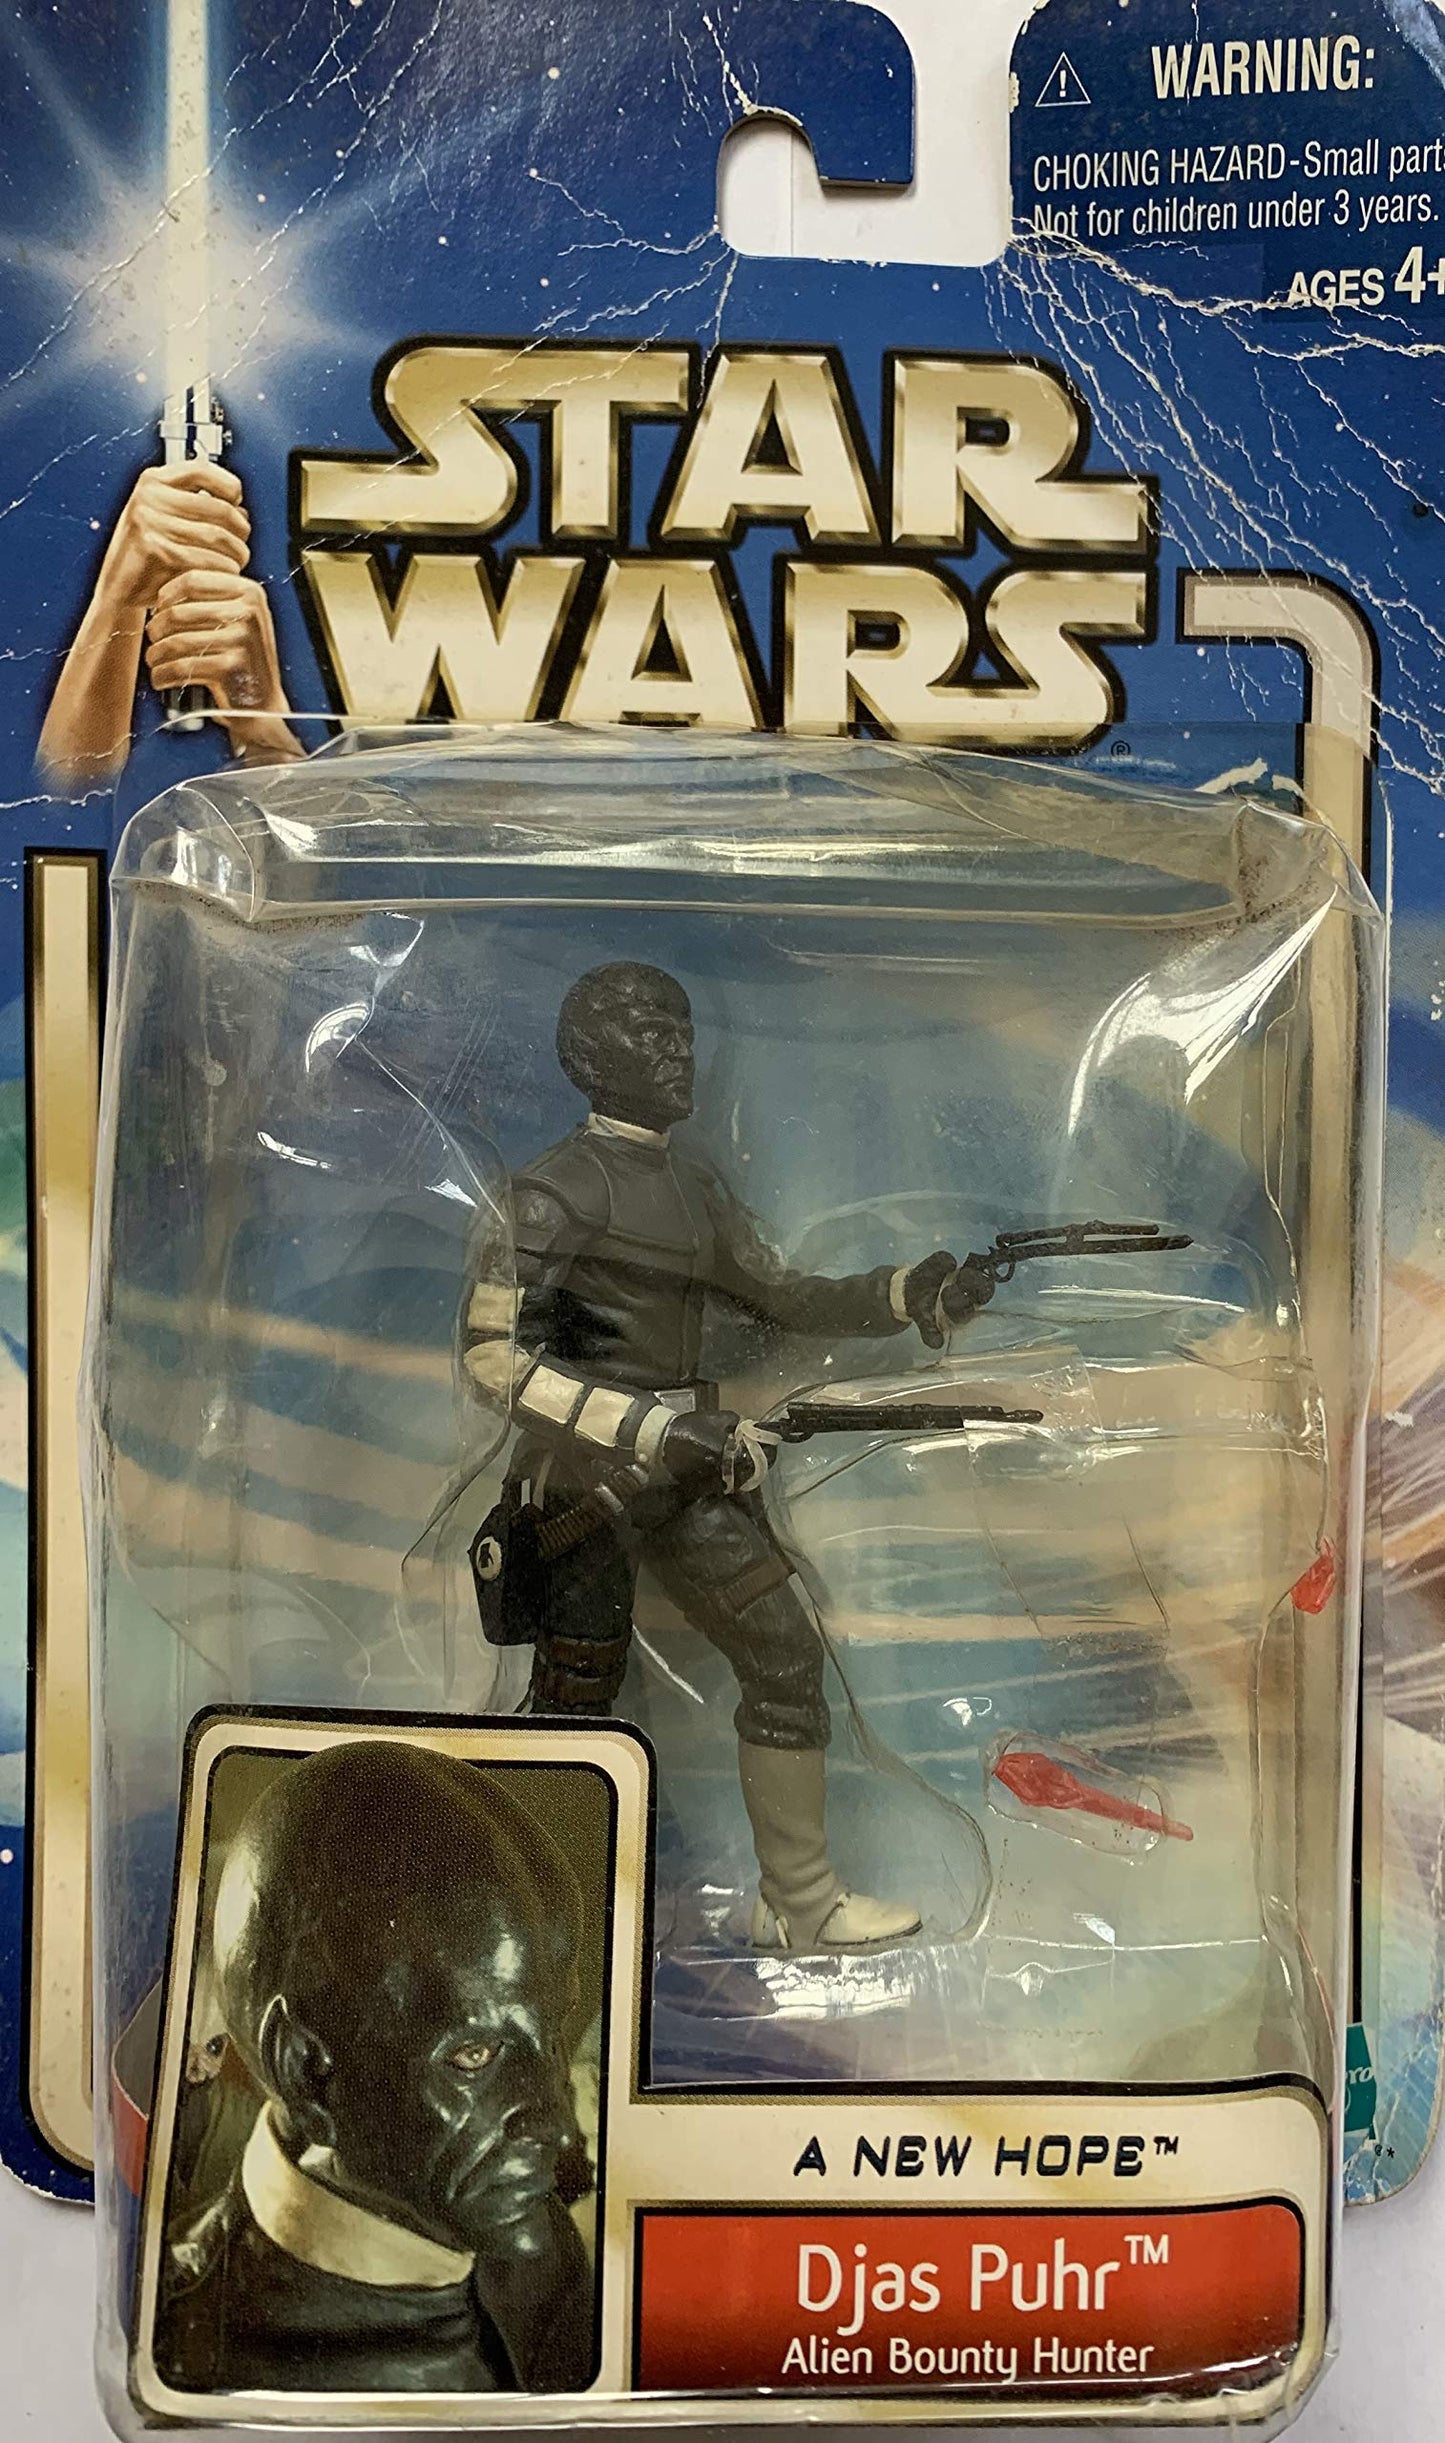 Vintage 2002 Star Wars A New Hope Collection 2 - Djas Puhr Alien Bounty Hunter Action Figure - Brand New Factory Sealed Shop Stock Room Find